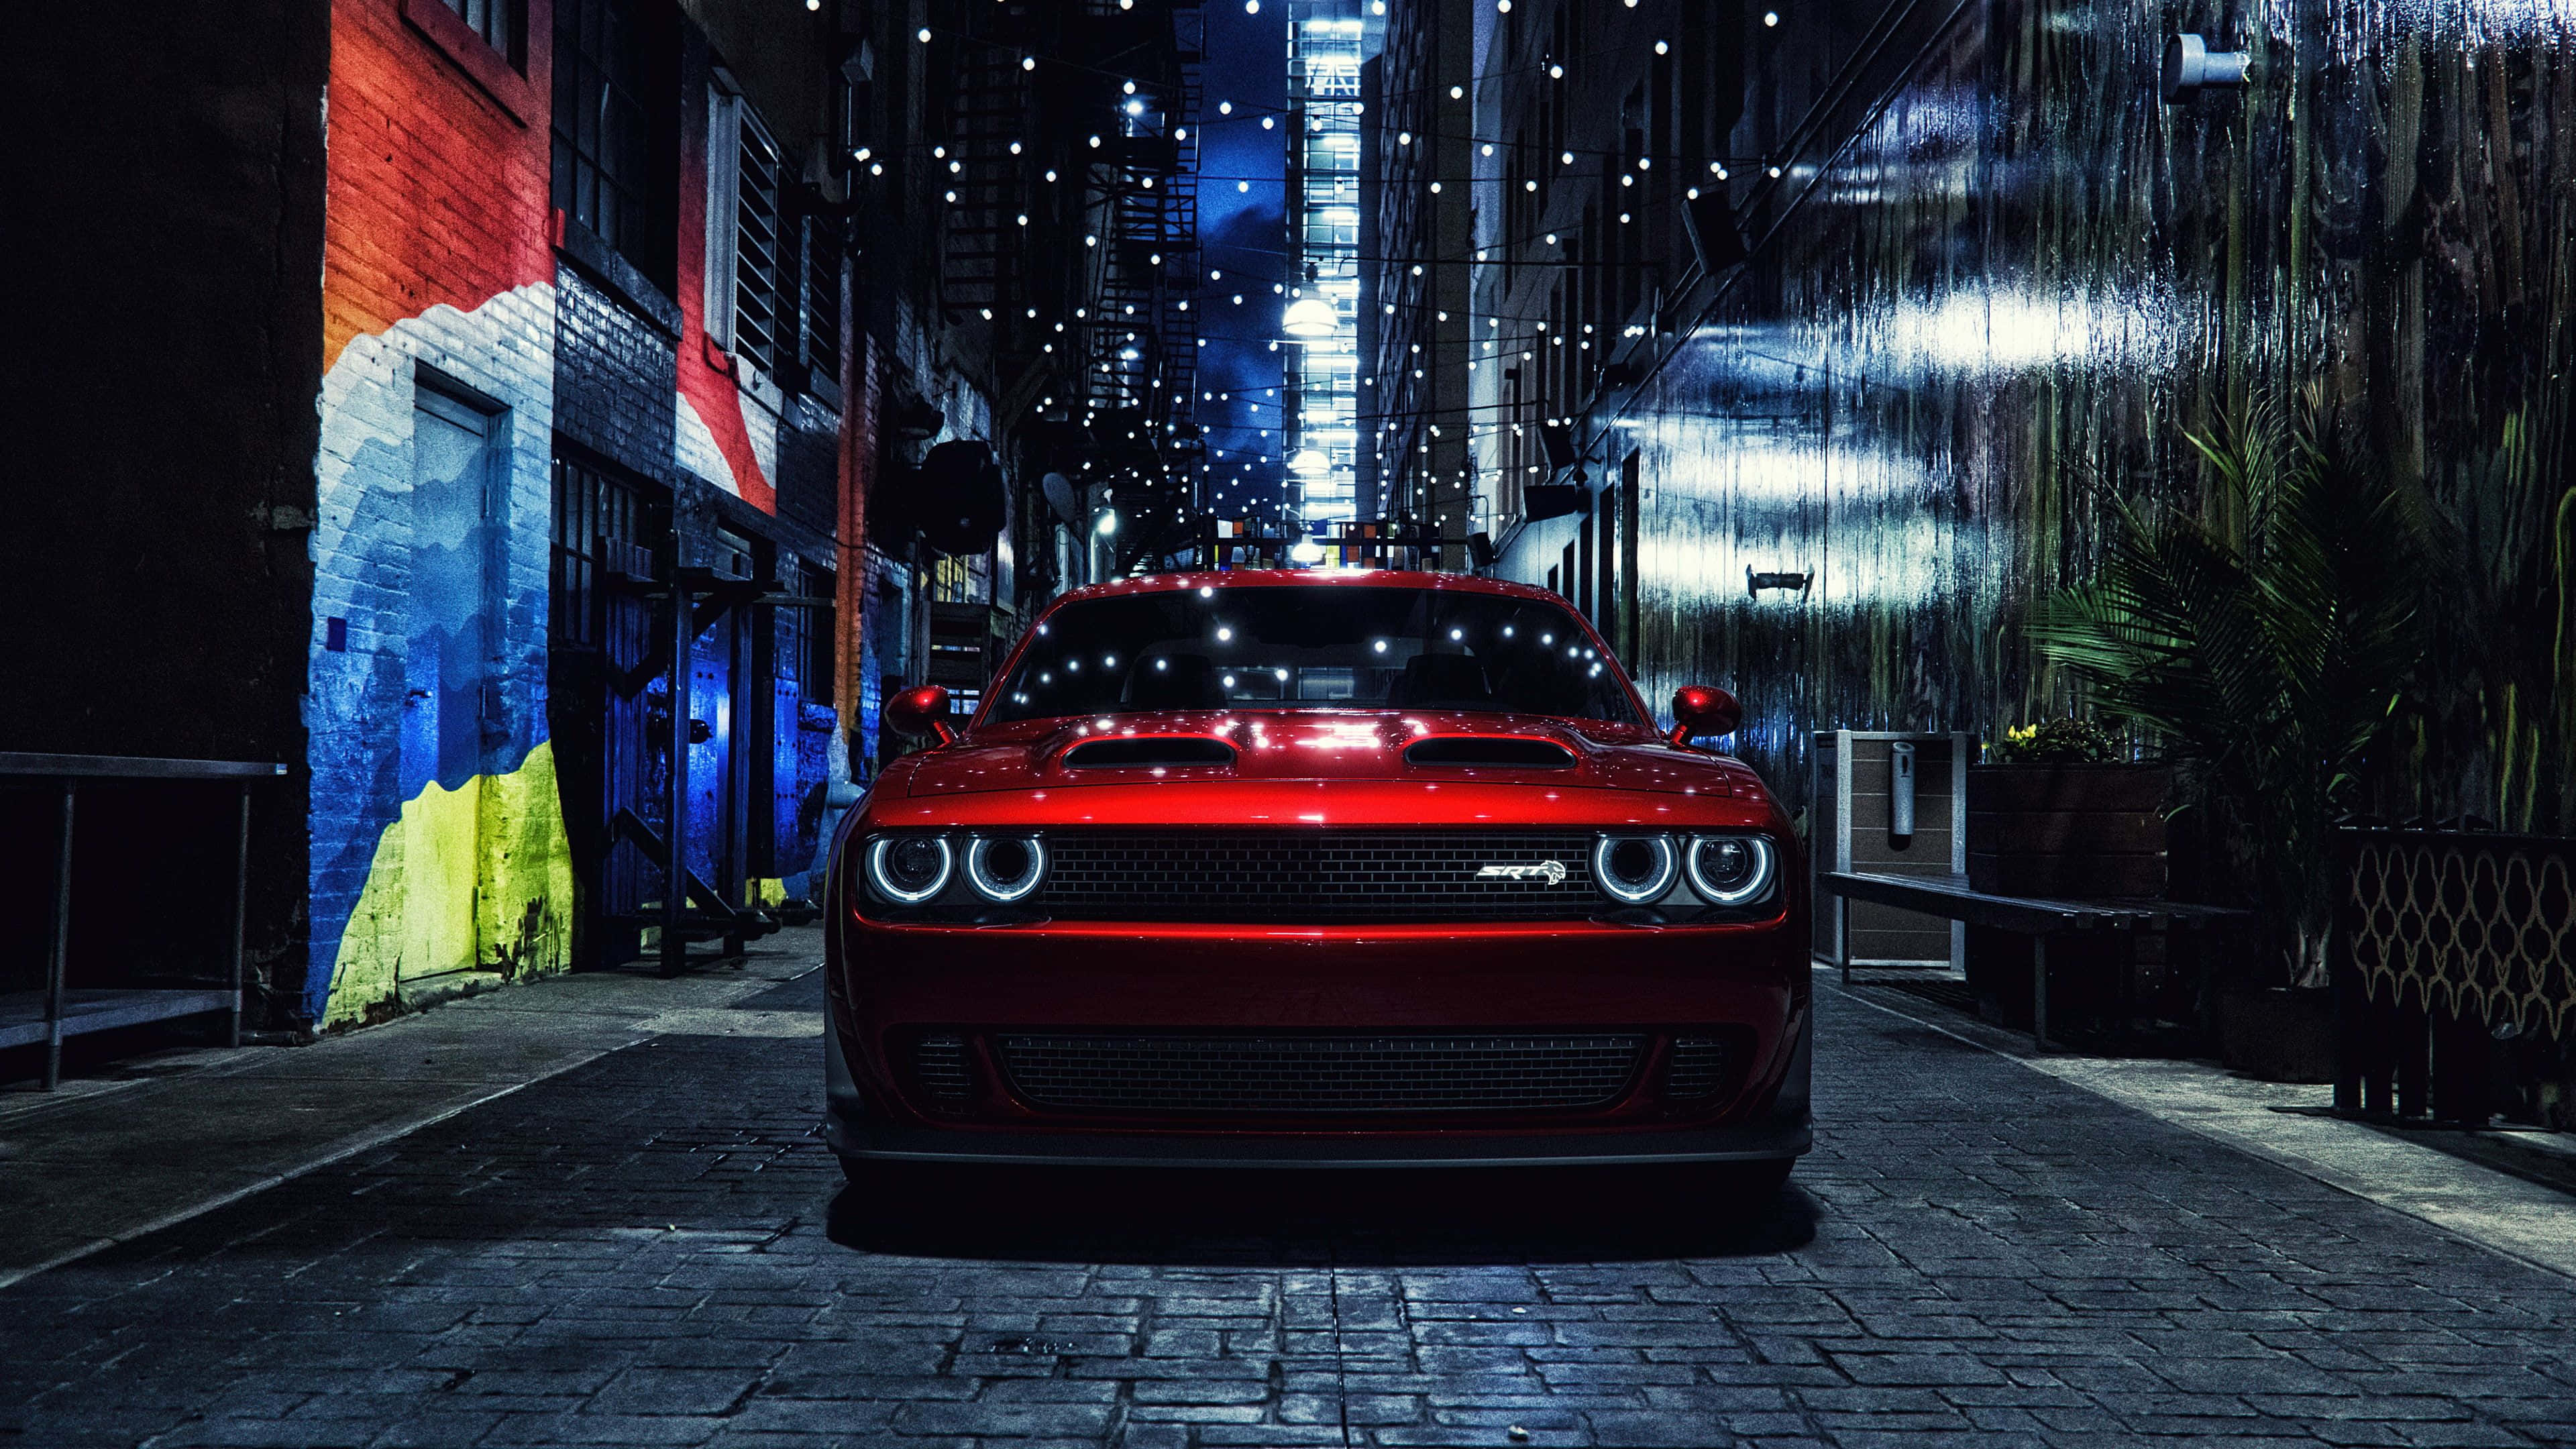 Feel the Adrenaline Rush While Driving the Dodge Challenger 4k Wallpaper